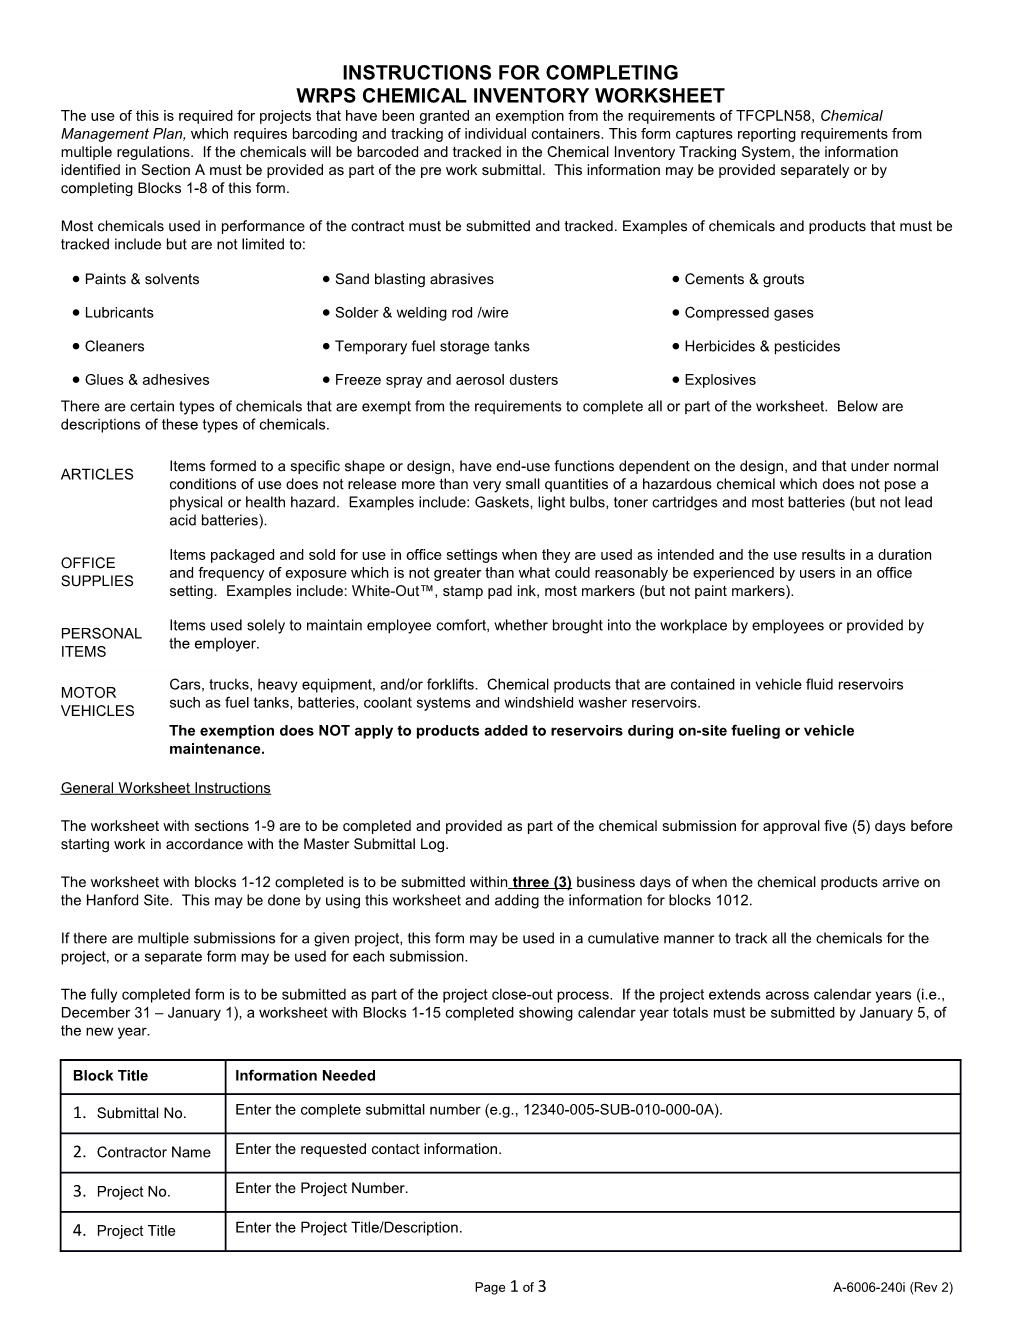 Wrps Chemical Inventory Worksheet